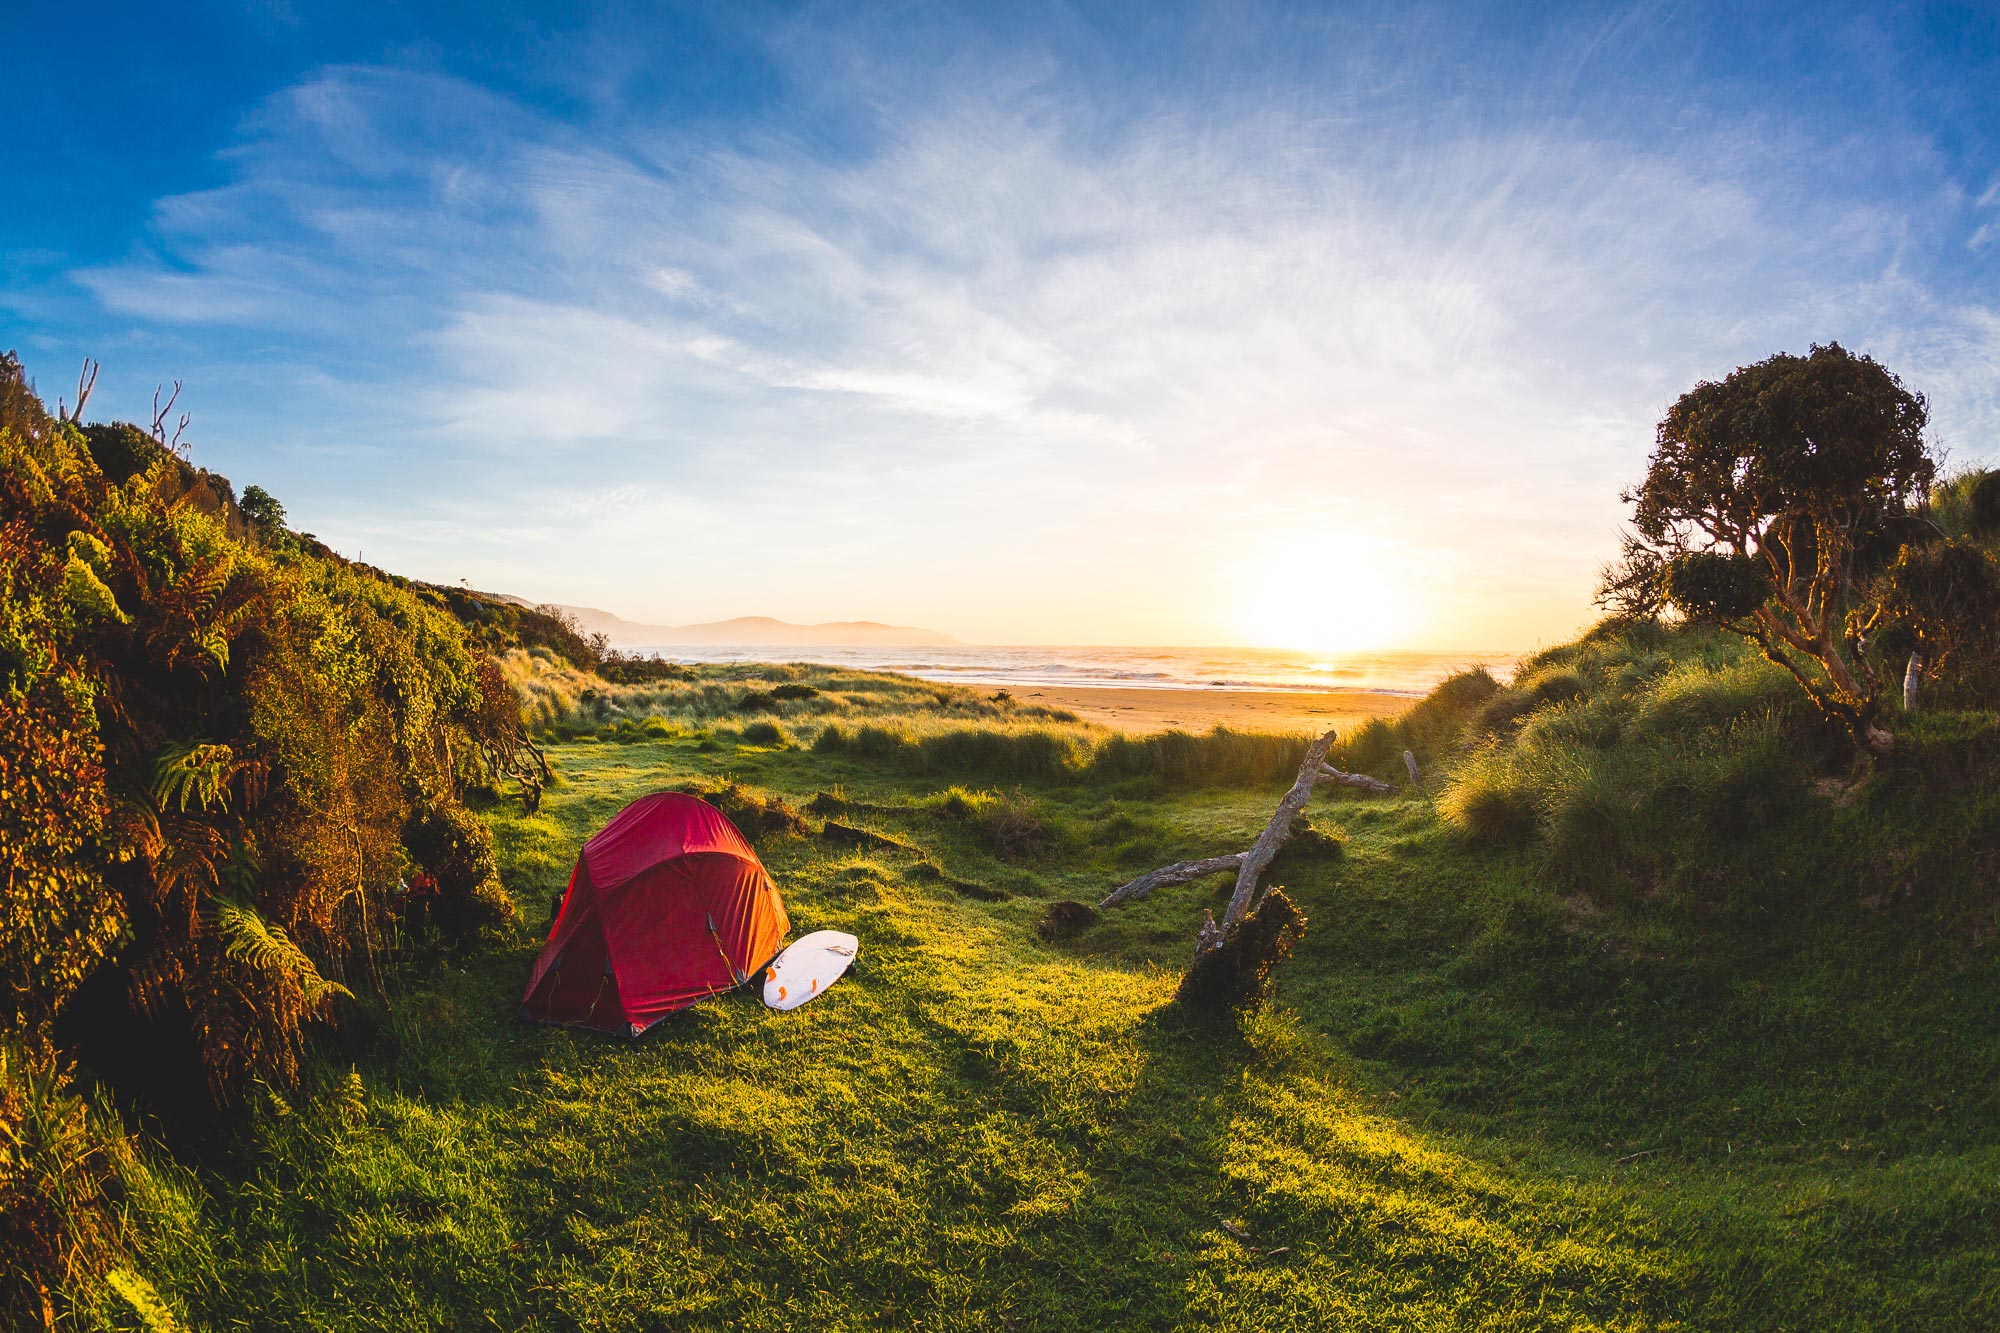 Camping at the beach in New Zealand